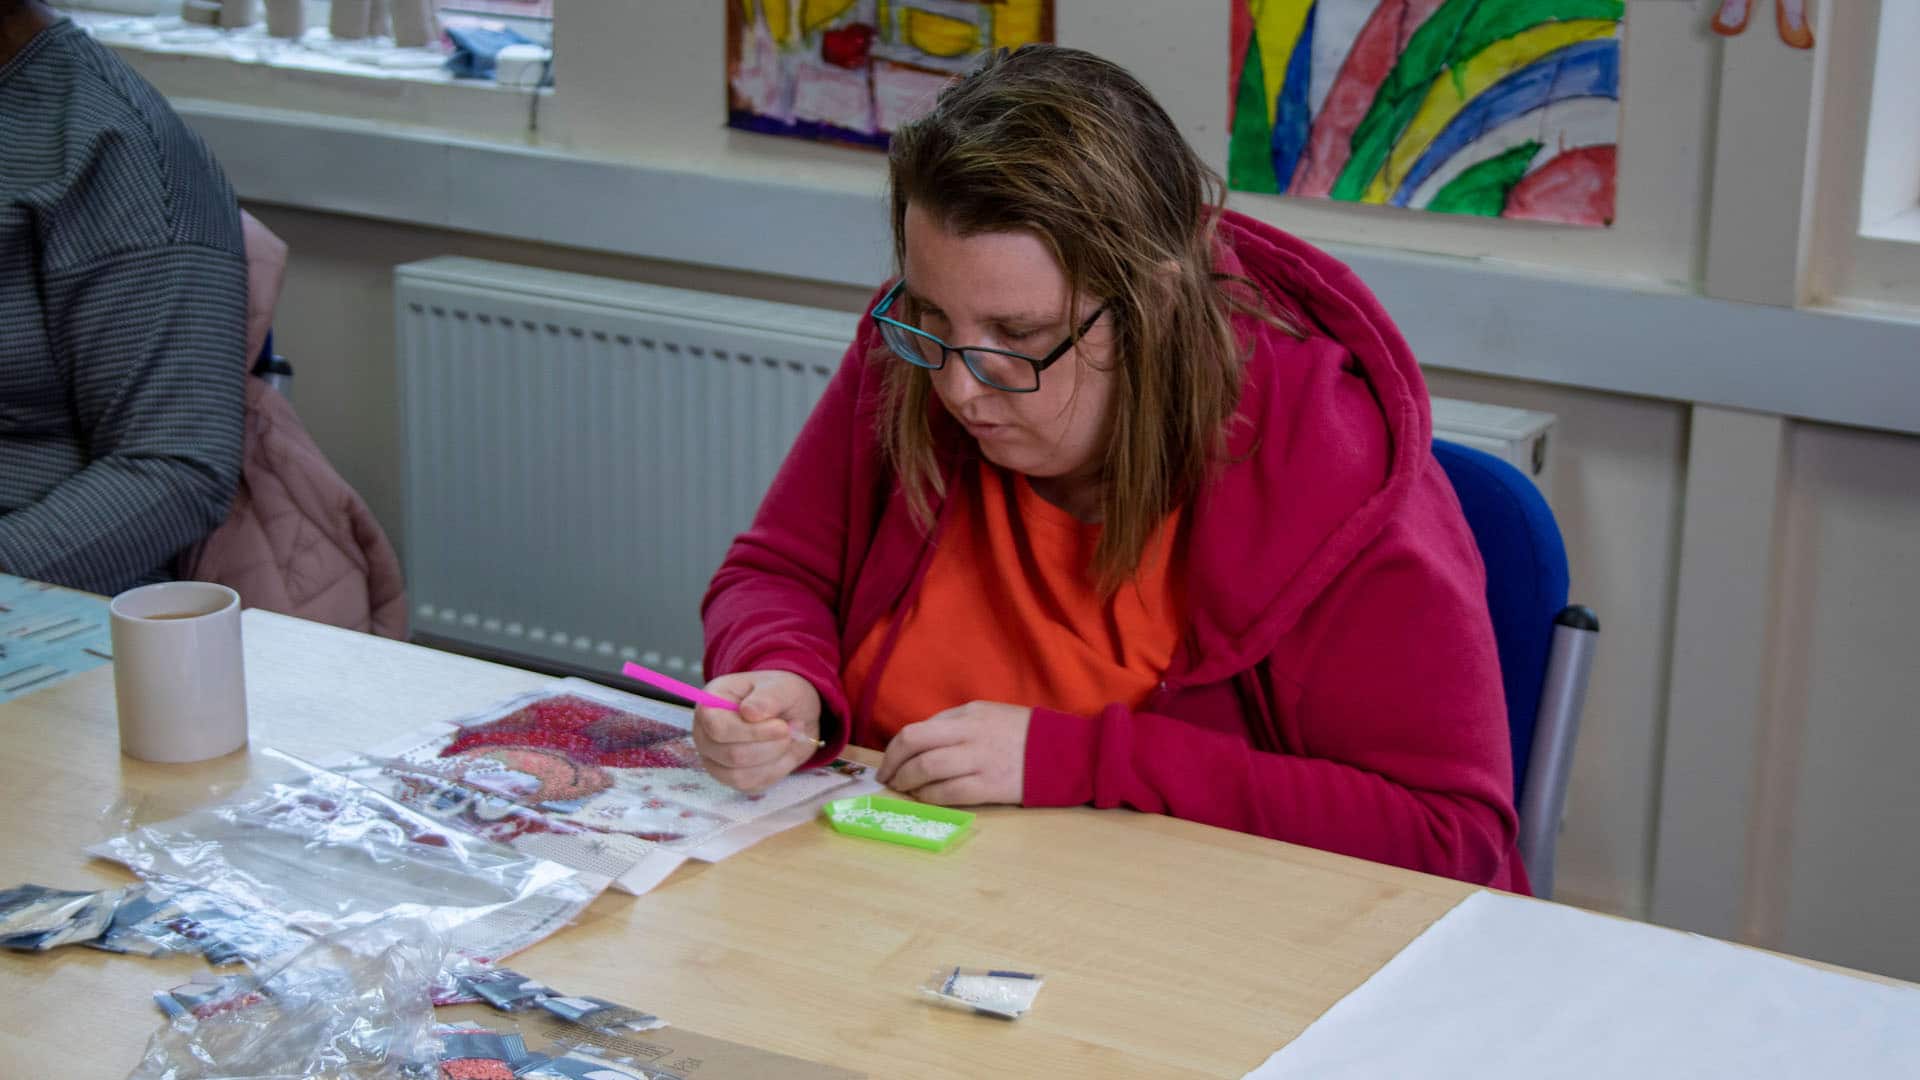 Service users working in the arts and crafts room